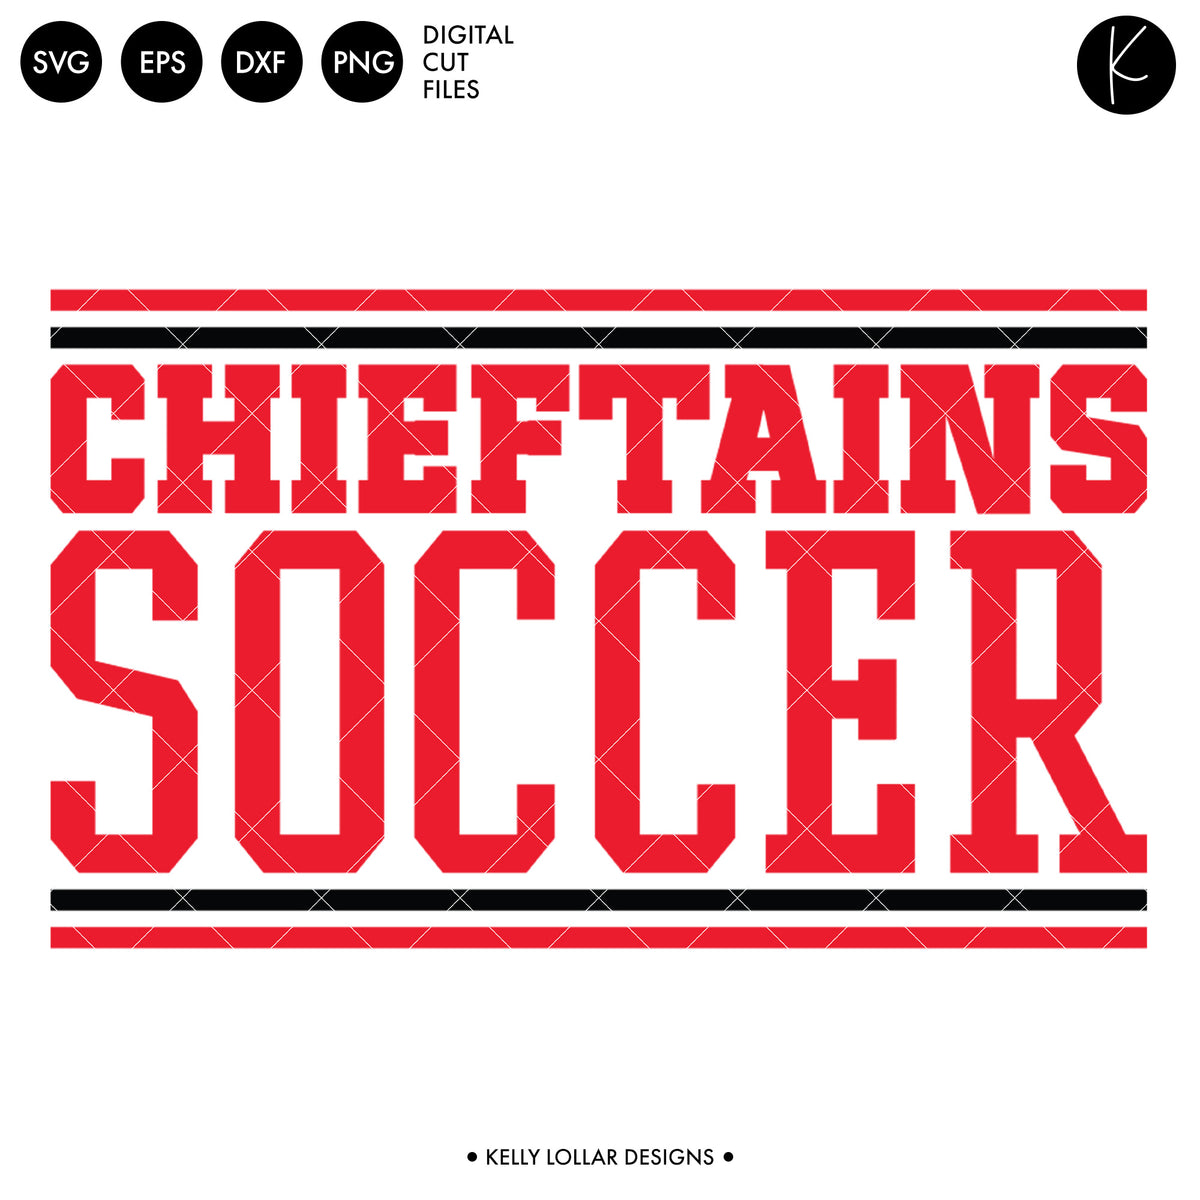 Chieftains Soccer and Football Bundle | SVG DXF EPS PNG Cut Files